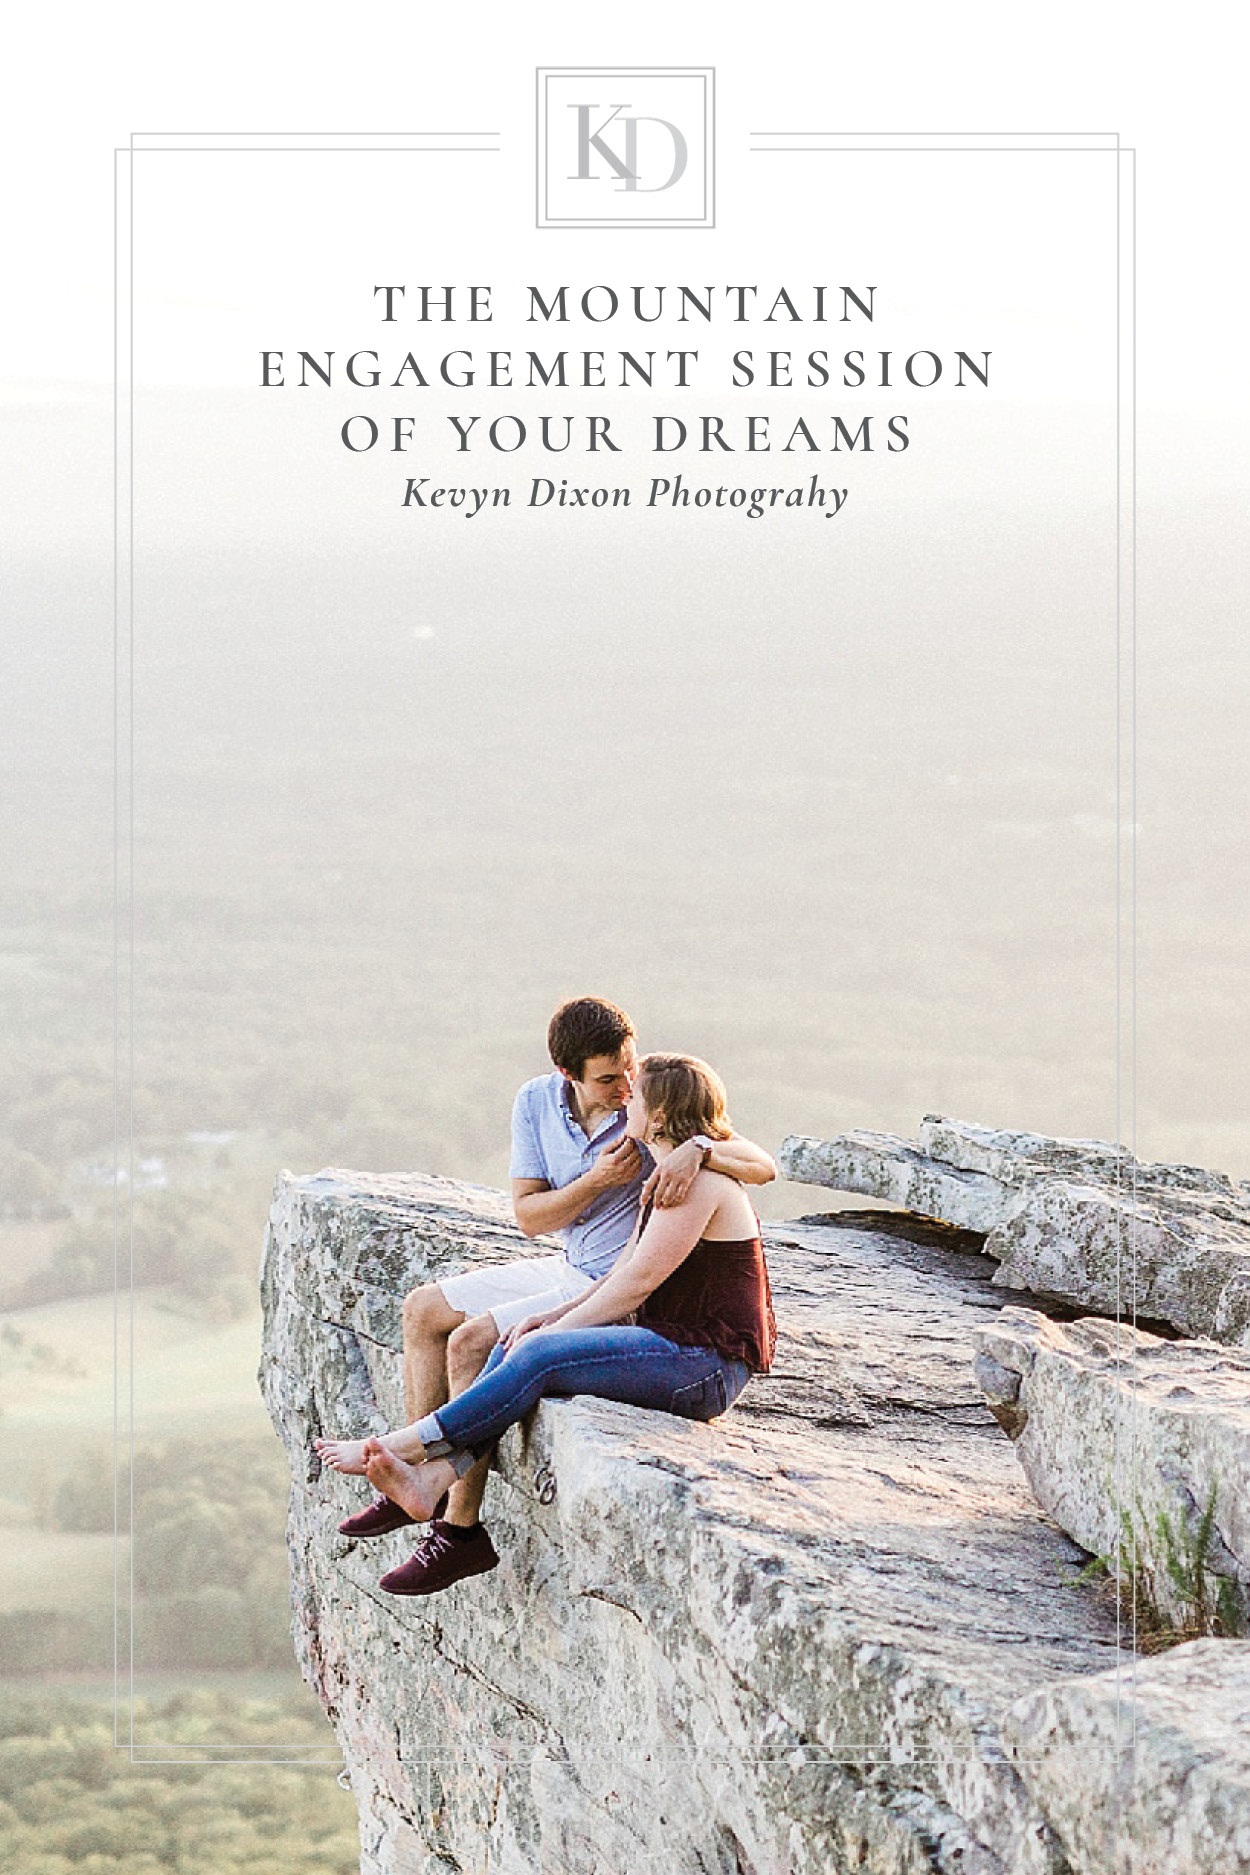 The Mountain Engagement Session of Your Dreams with Scenic Overlook Pin Image